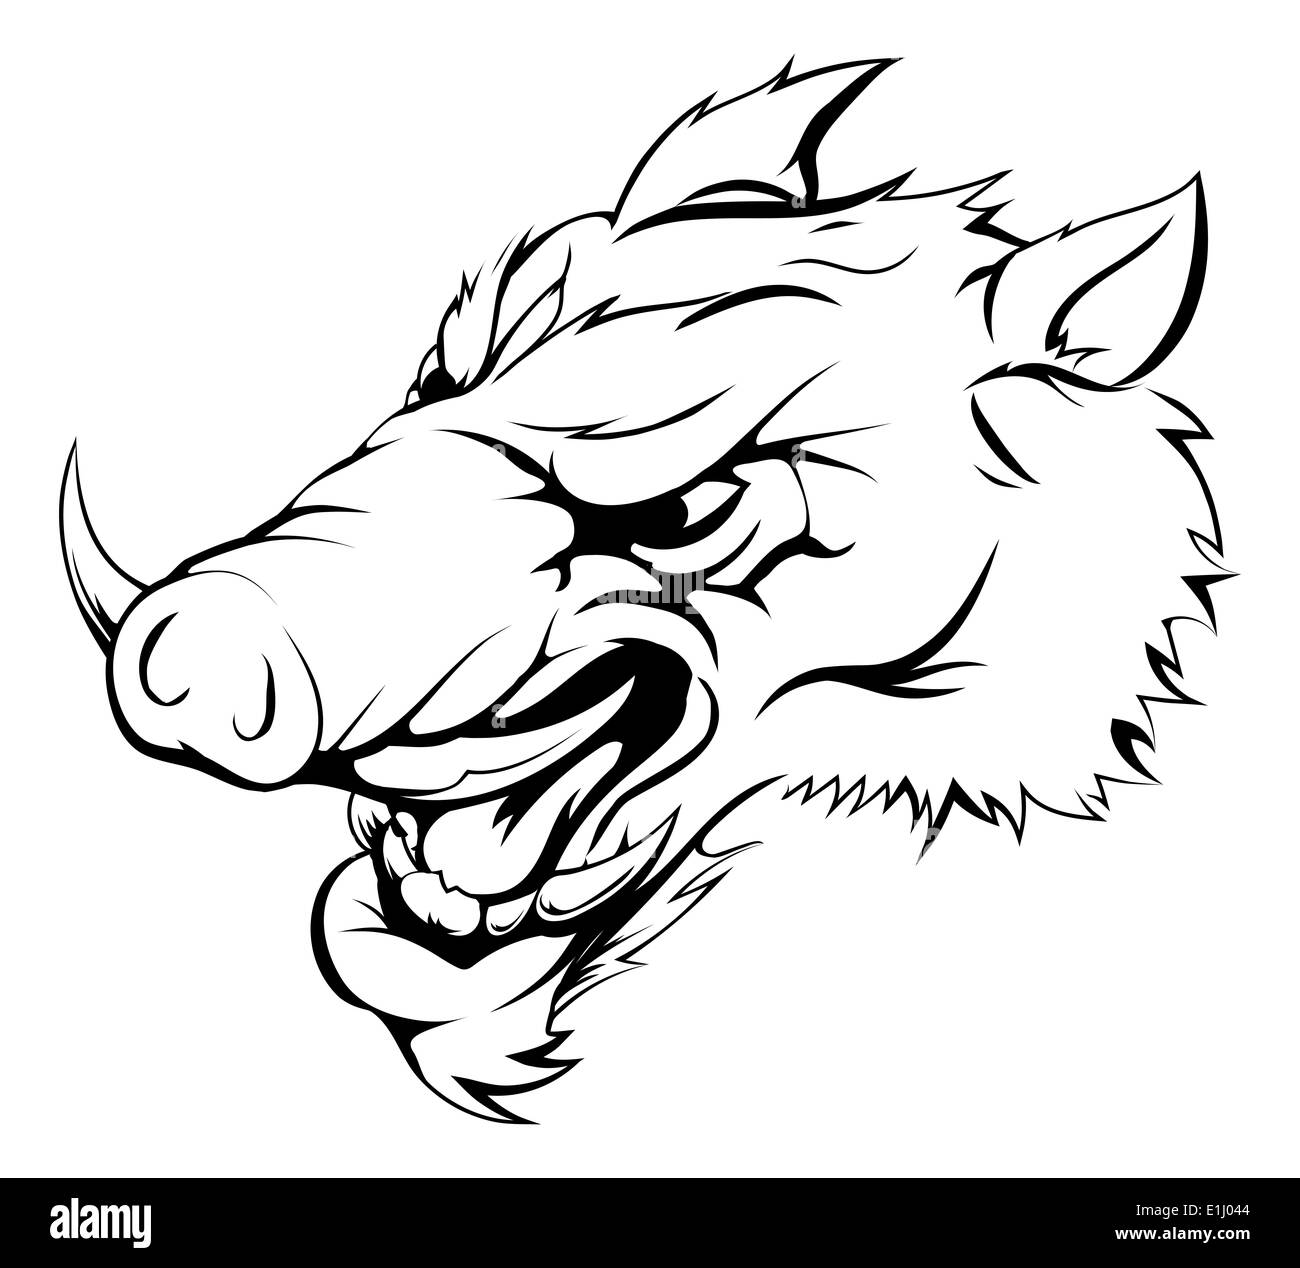 An illustration of a strong angry boar mascot roaring Stock Photo